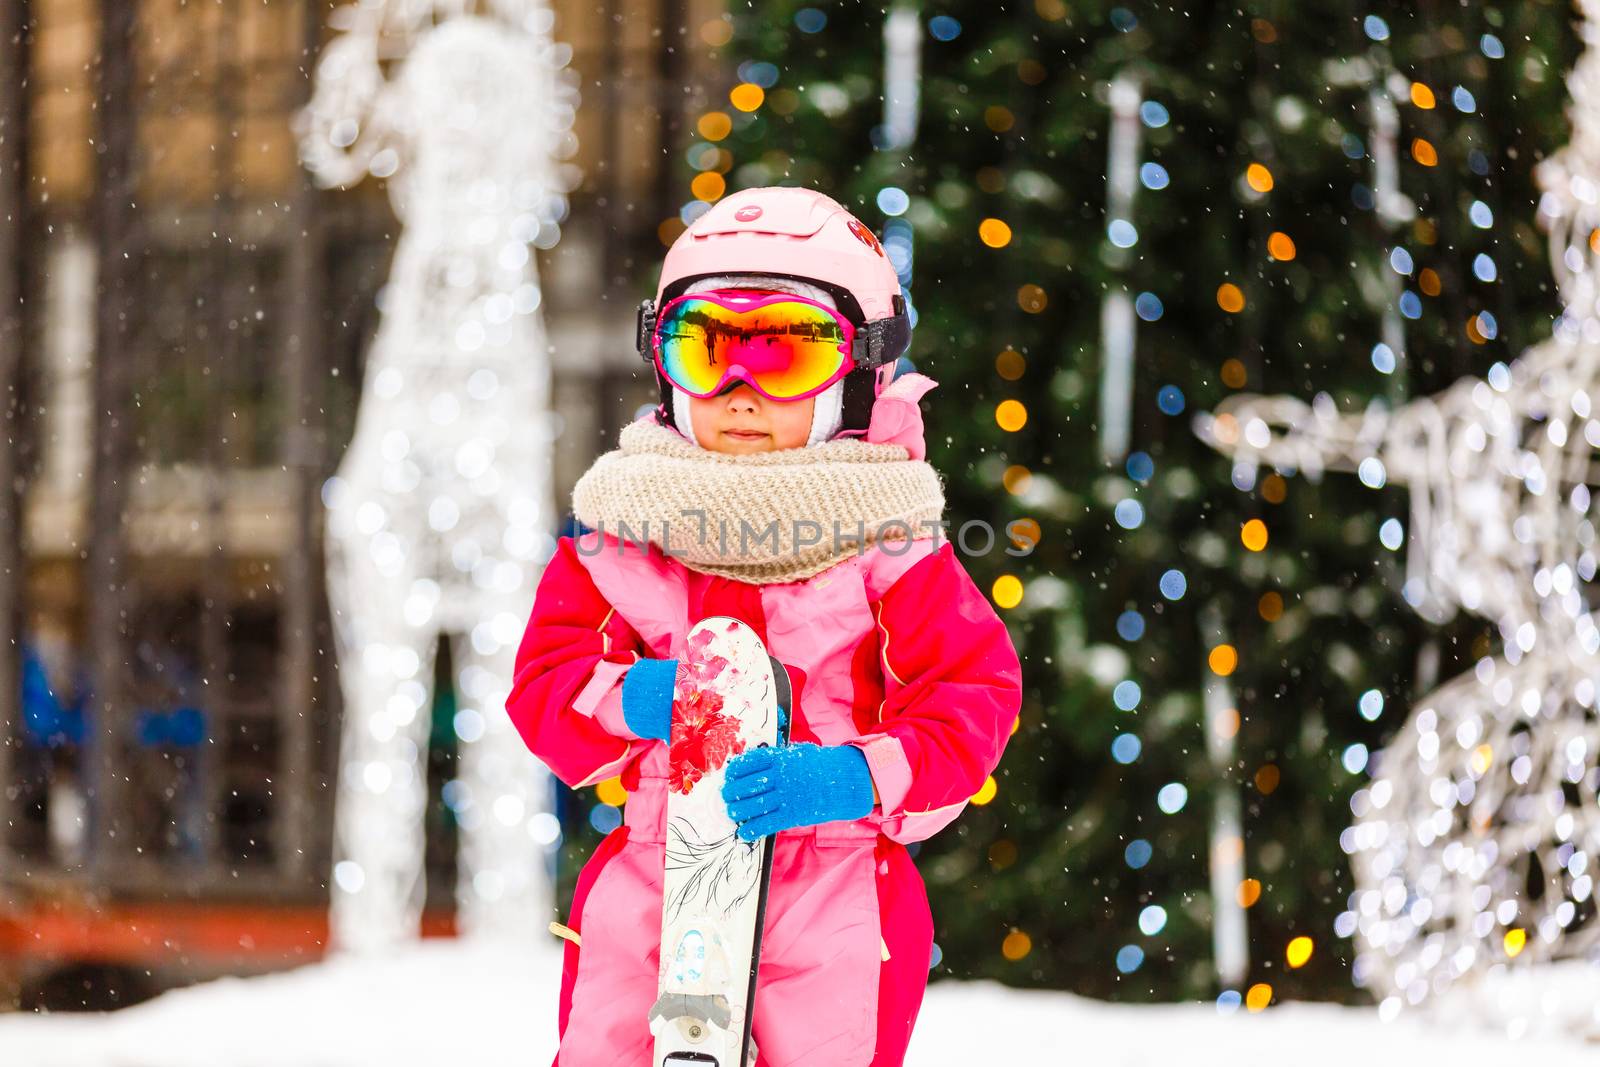 Little girl wearing goggles and helmet on a winter vacation outdoors holding skis behind looking camera smiling excited close-up blurred background by Andelov13